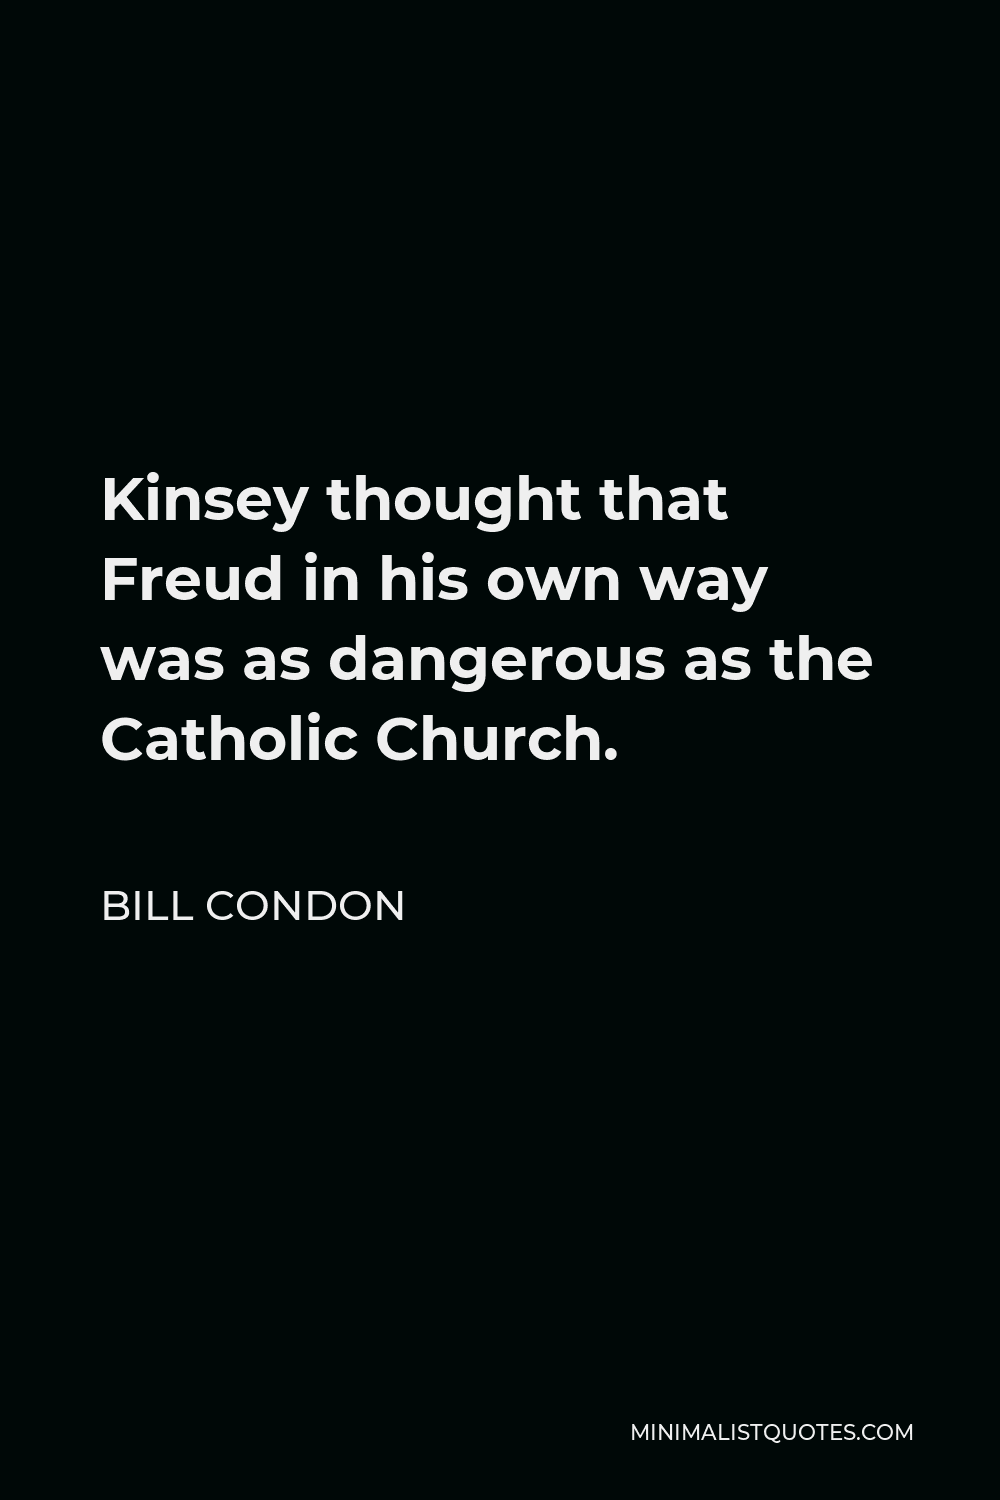 Bill Condon Quote - Kinsey thought that Freud in his own way was as dangerous as the Catholic Church.